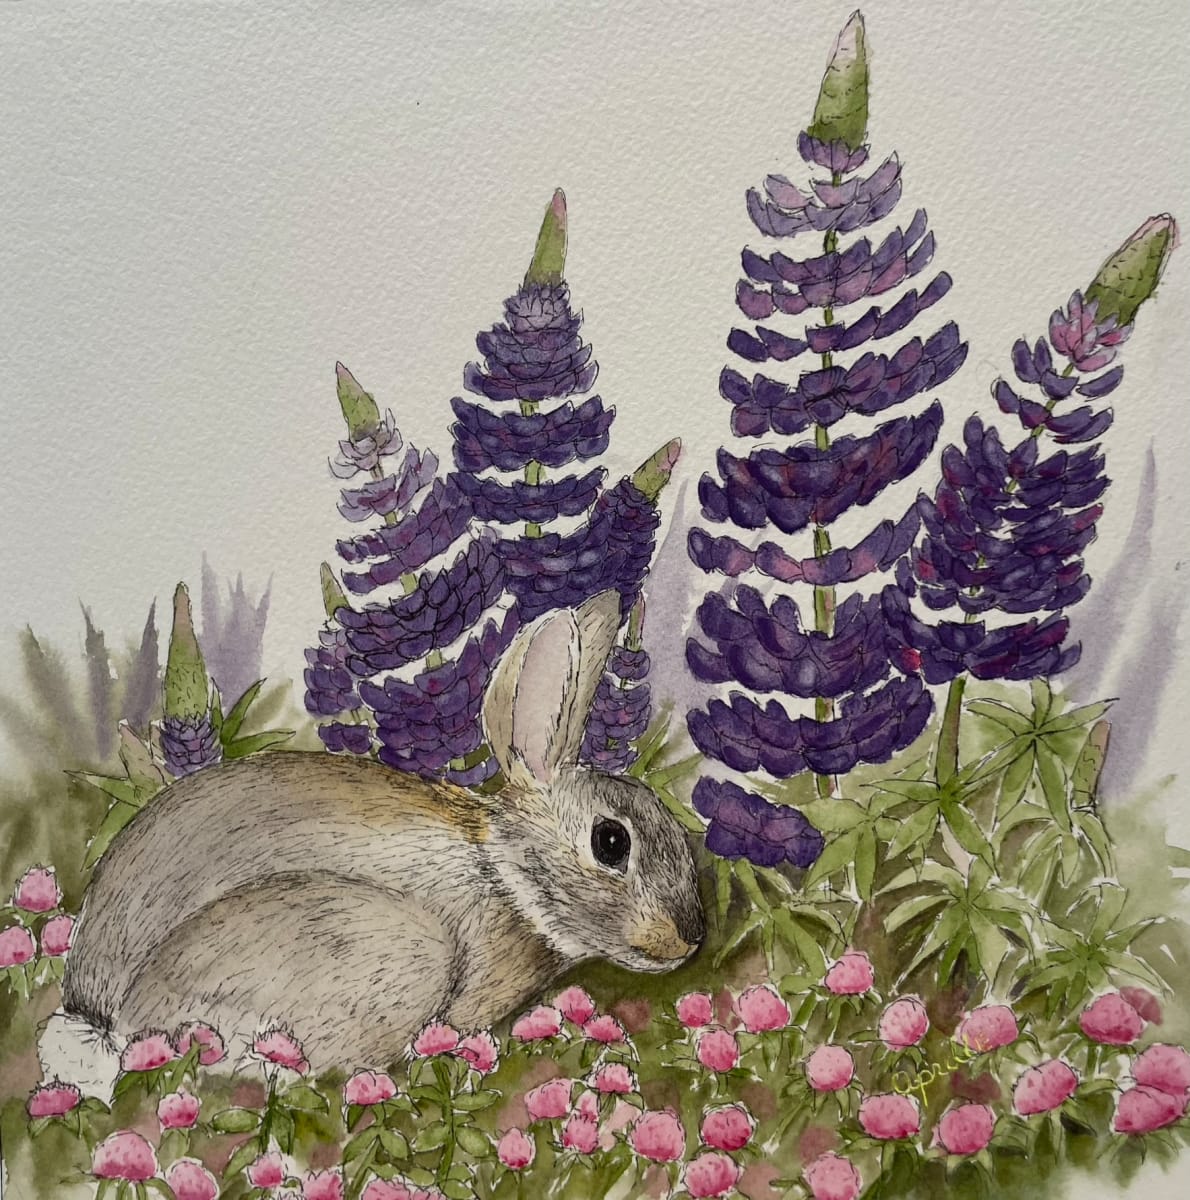 Bunny and Lupines by Aprille Janes 